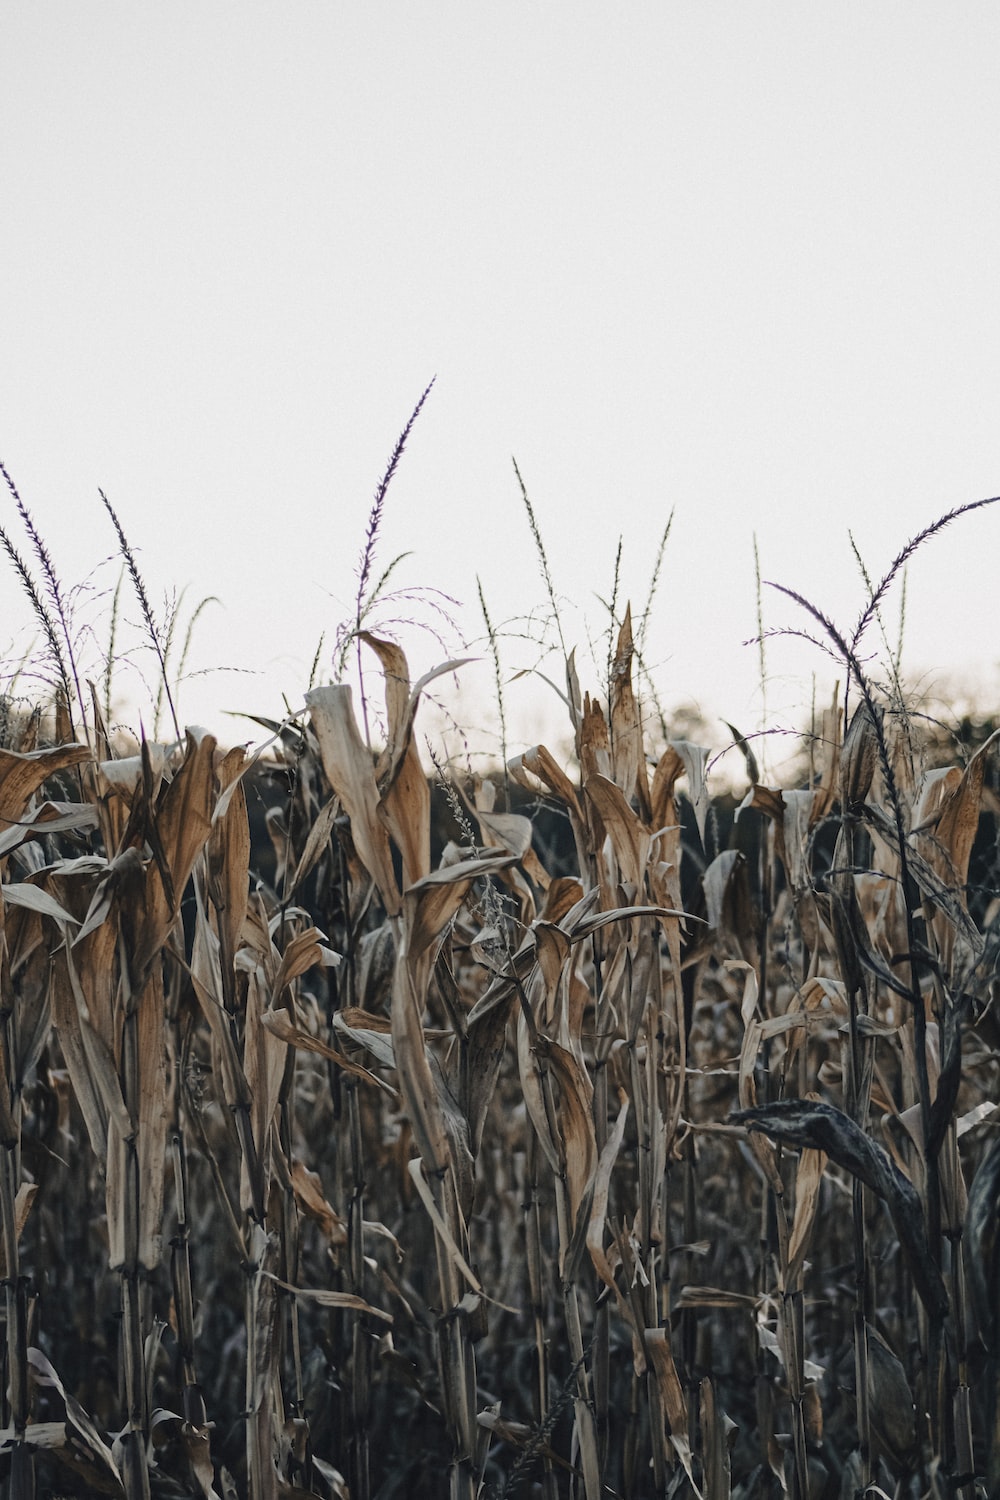 a field of corn is shown in the foreground